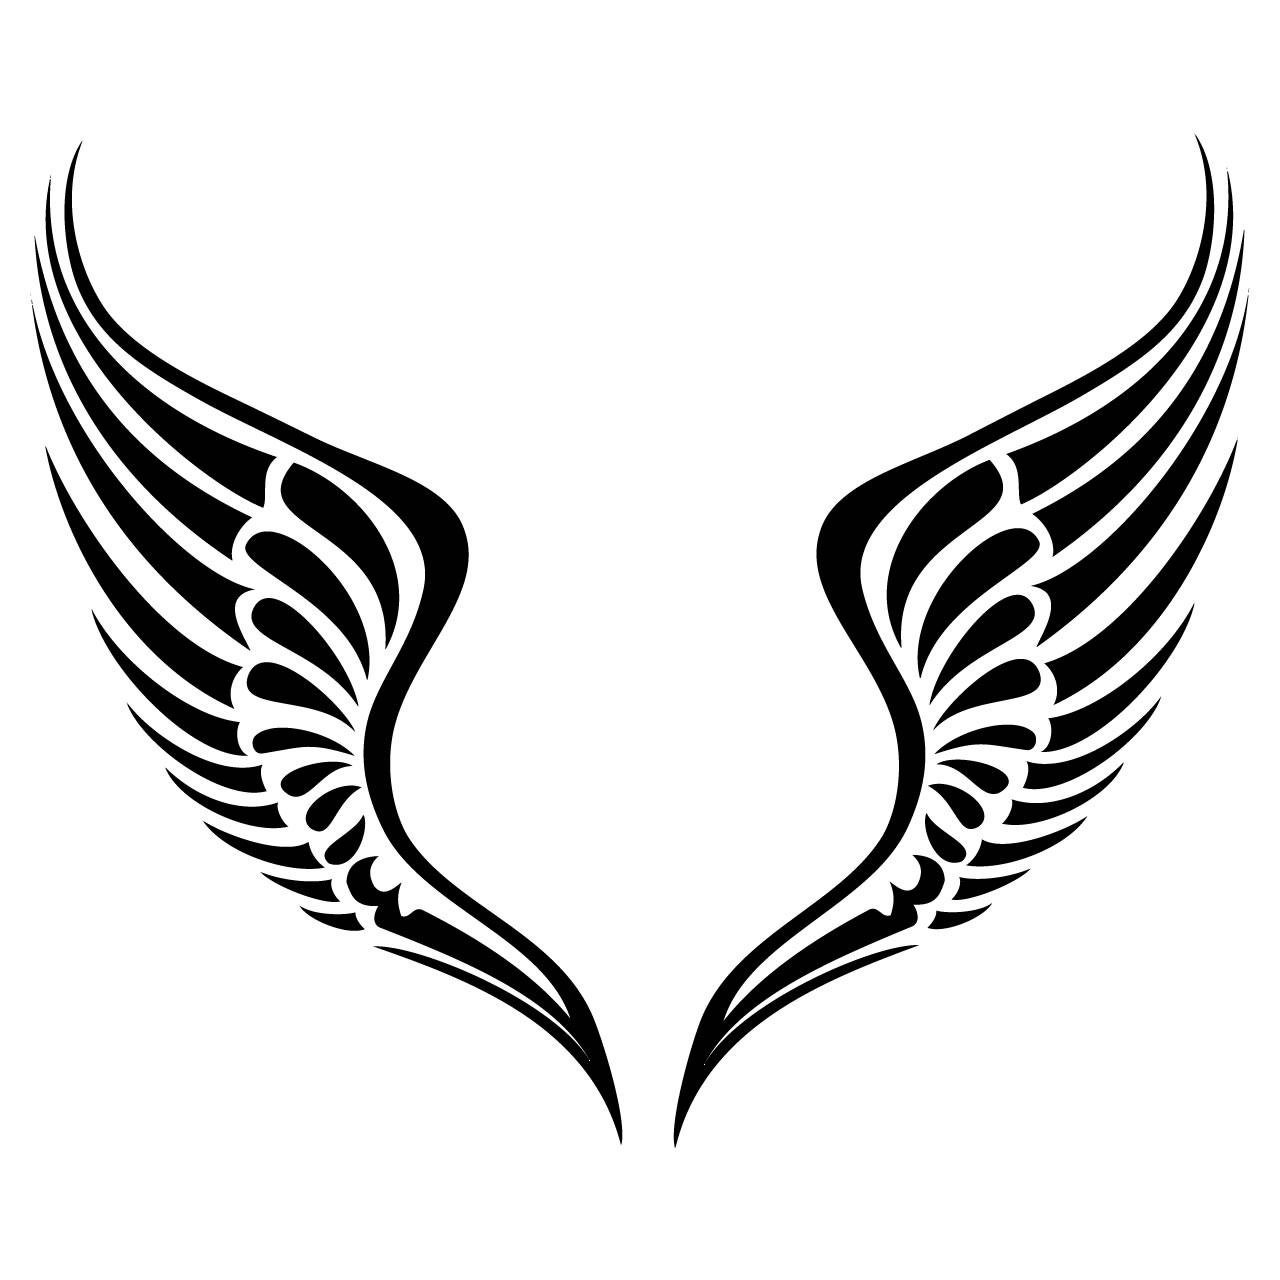 Halo and wings clipart 